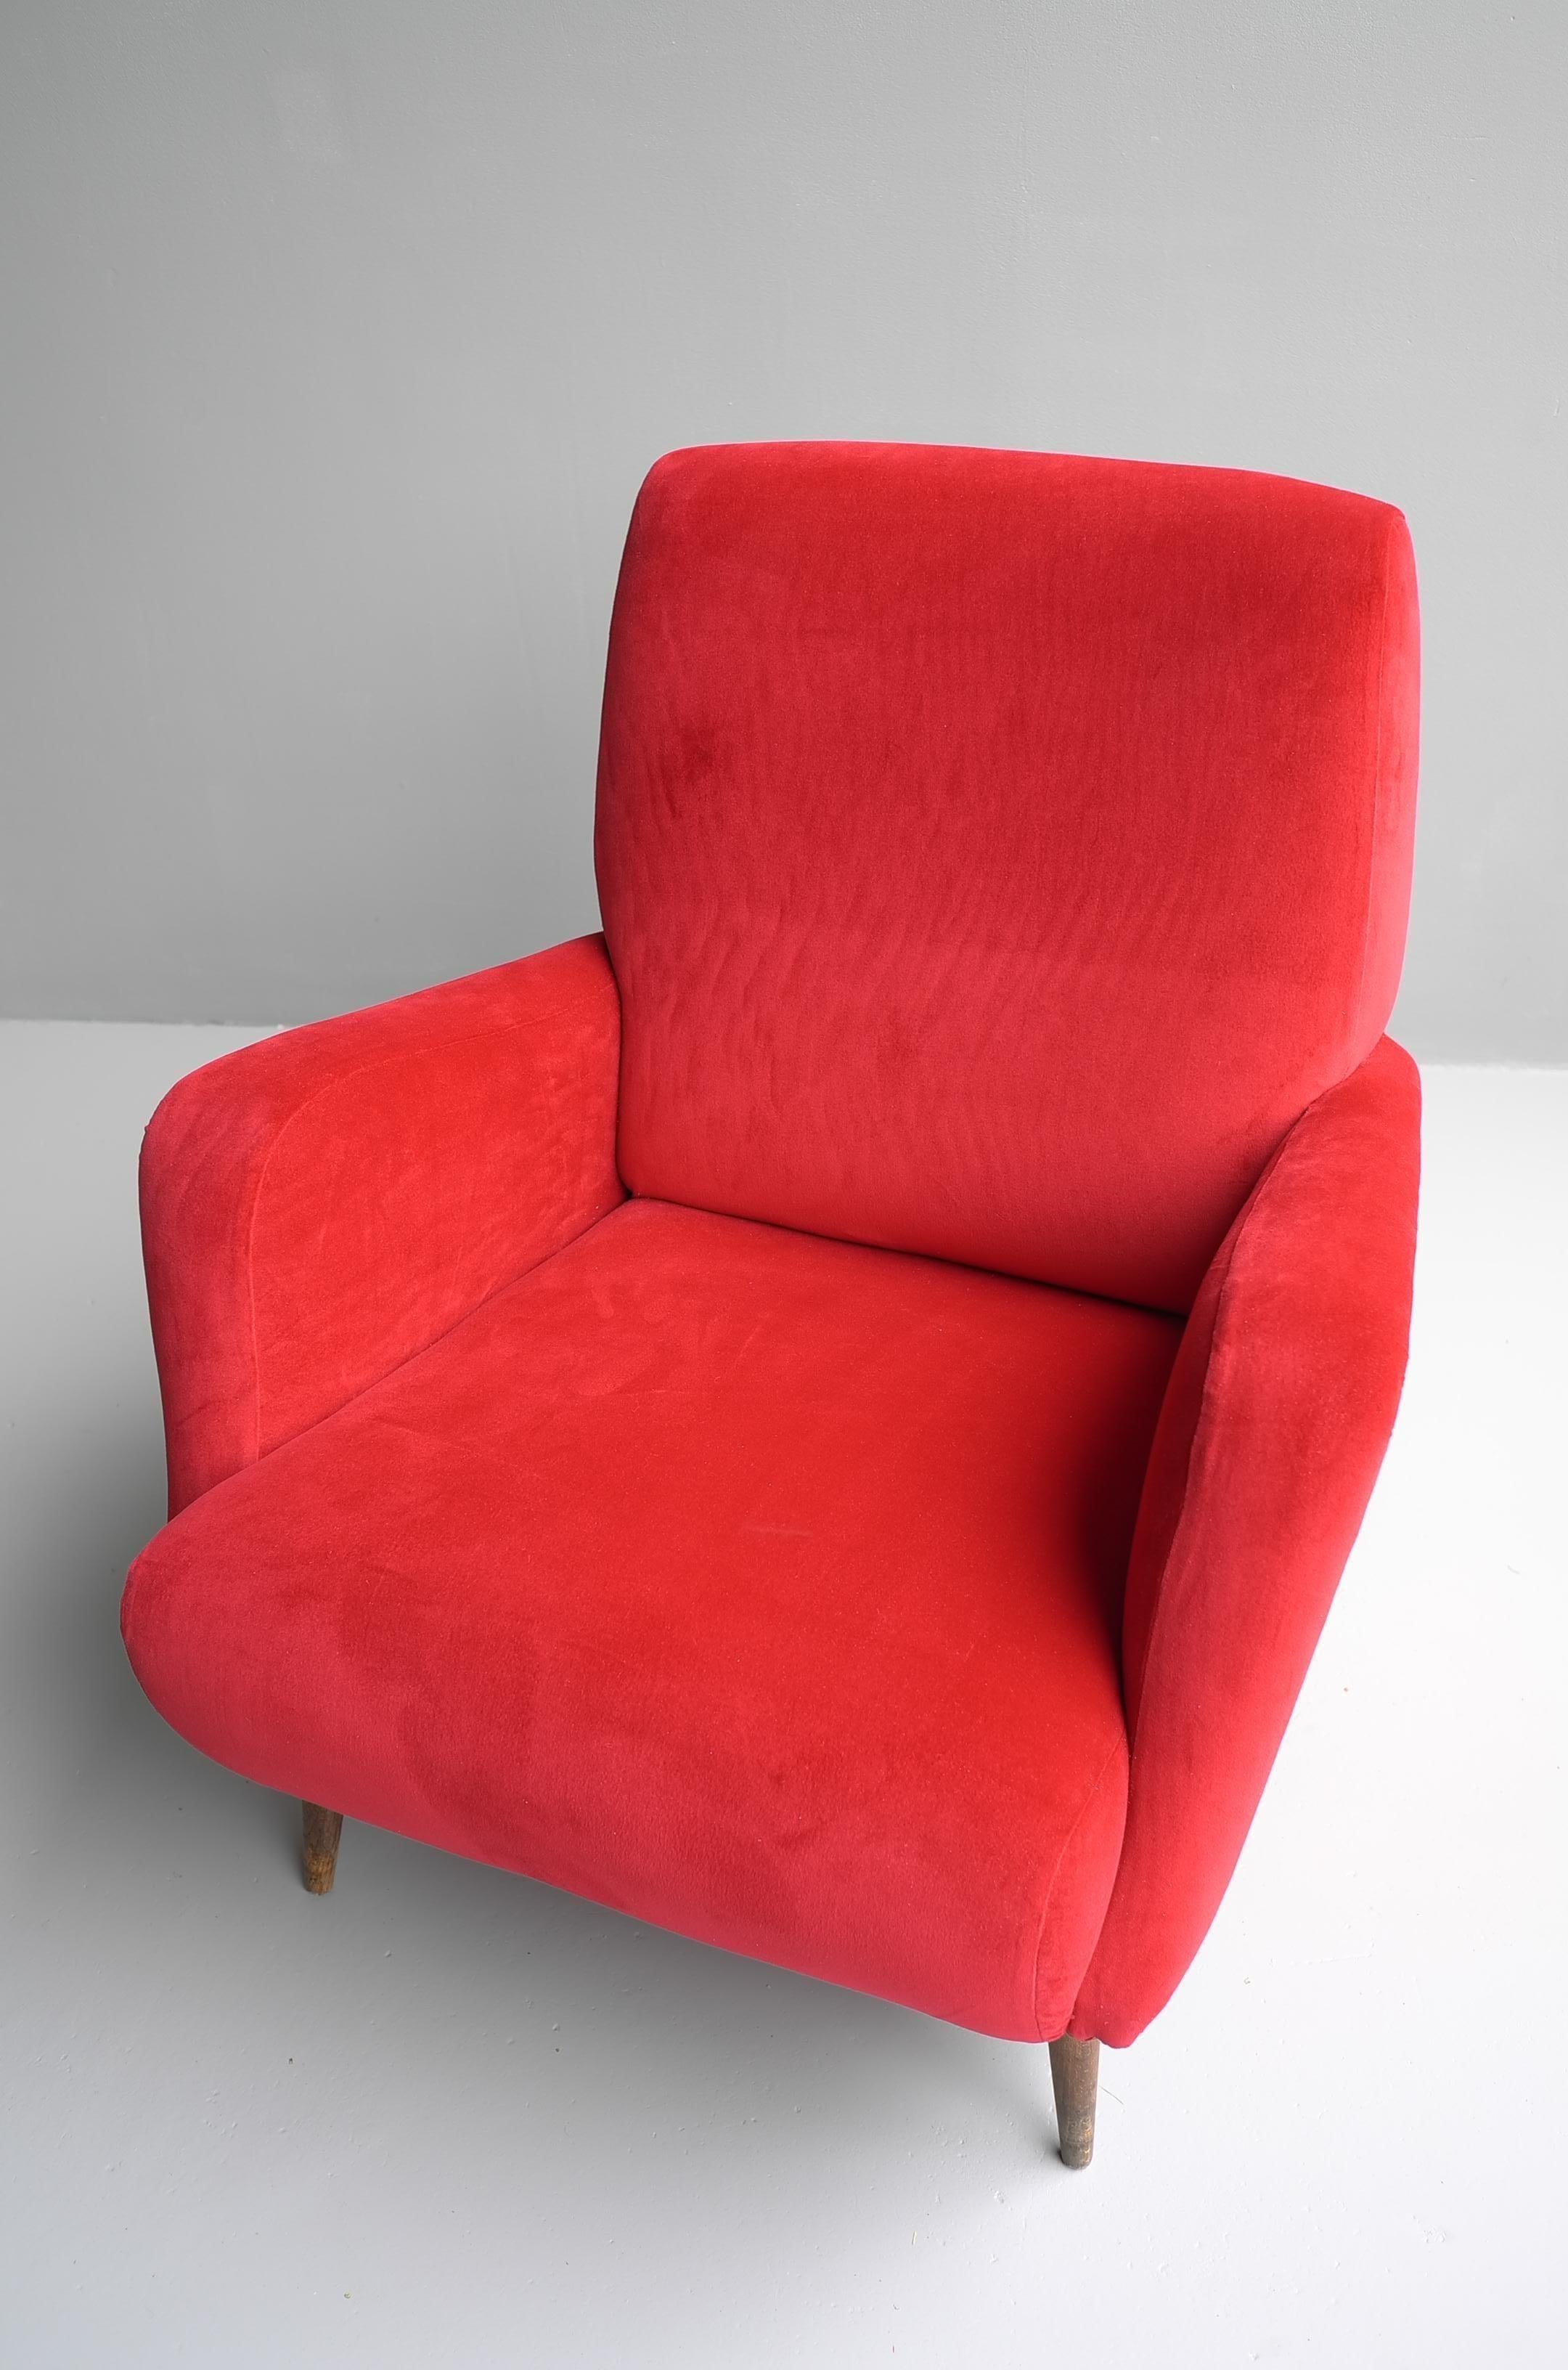 Carlo de Carli Red velvet and Walnut Armchair Model 806 by Cassina, Italy, 1955 For Sale 7